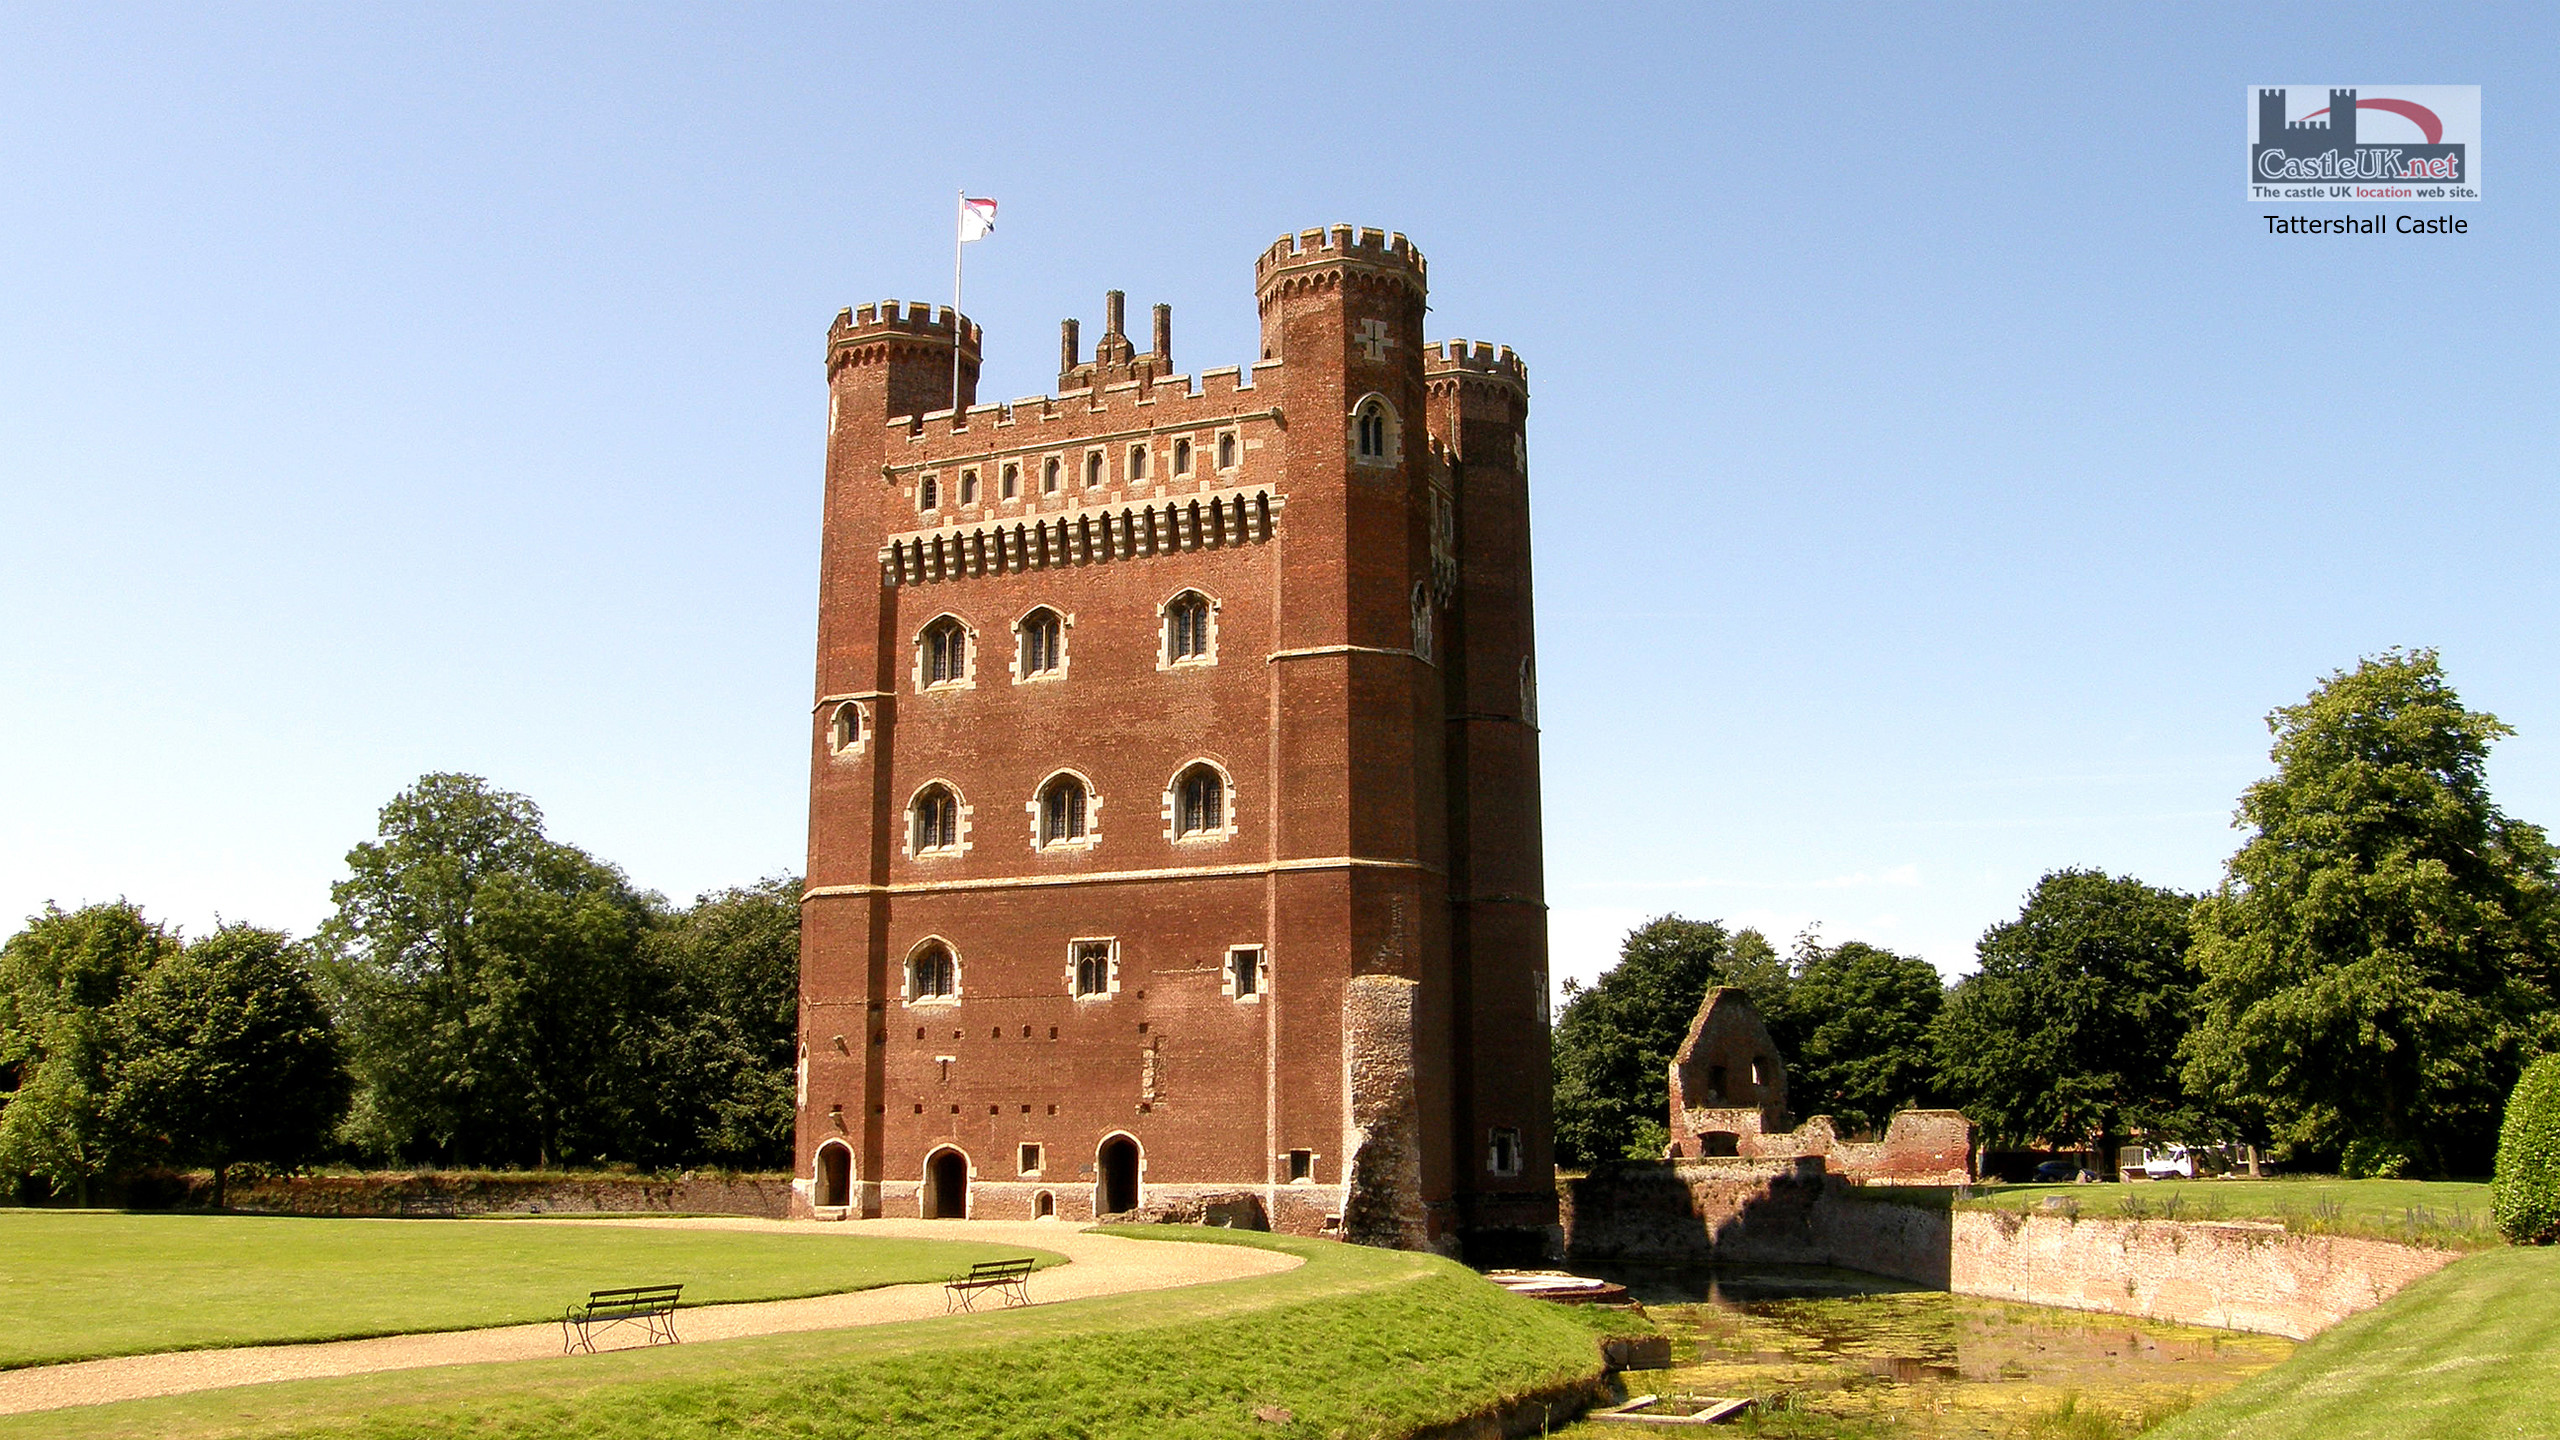 2560x1440 Tattershall Castle OS 122/TF 211-576 Lincolnshire England Wallpaper